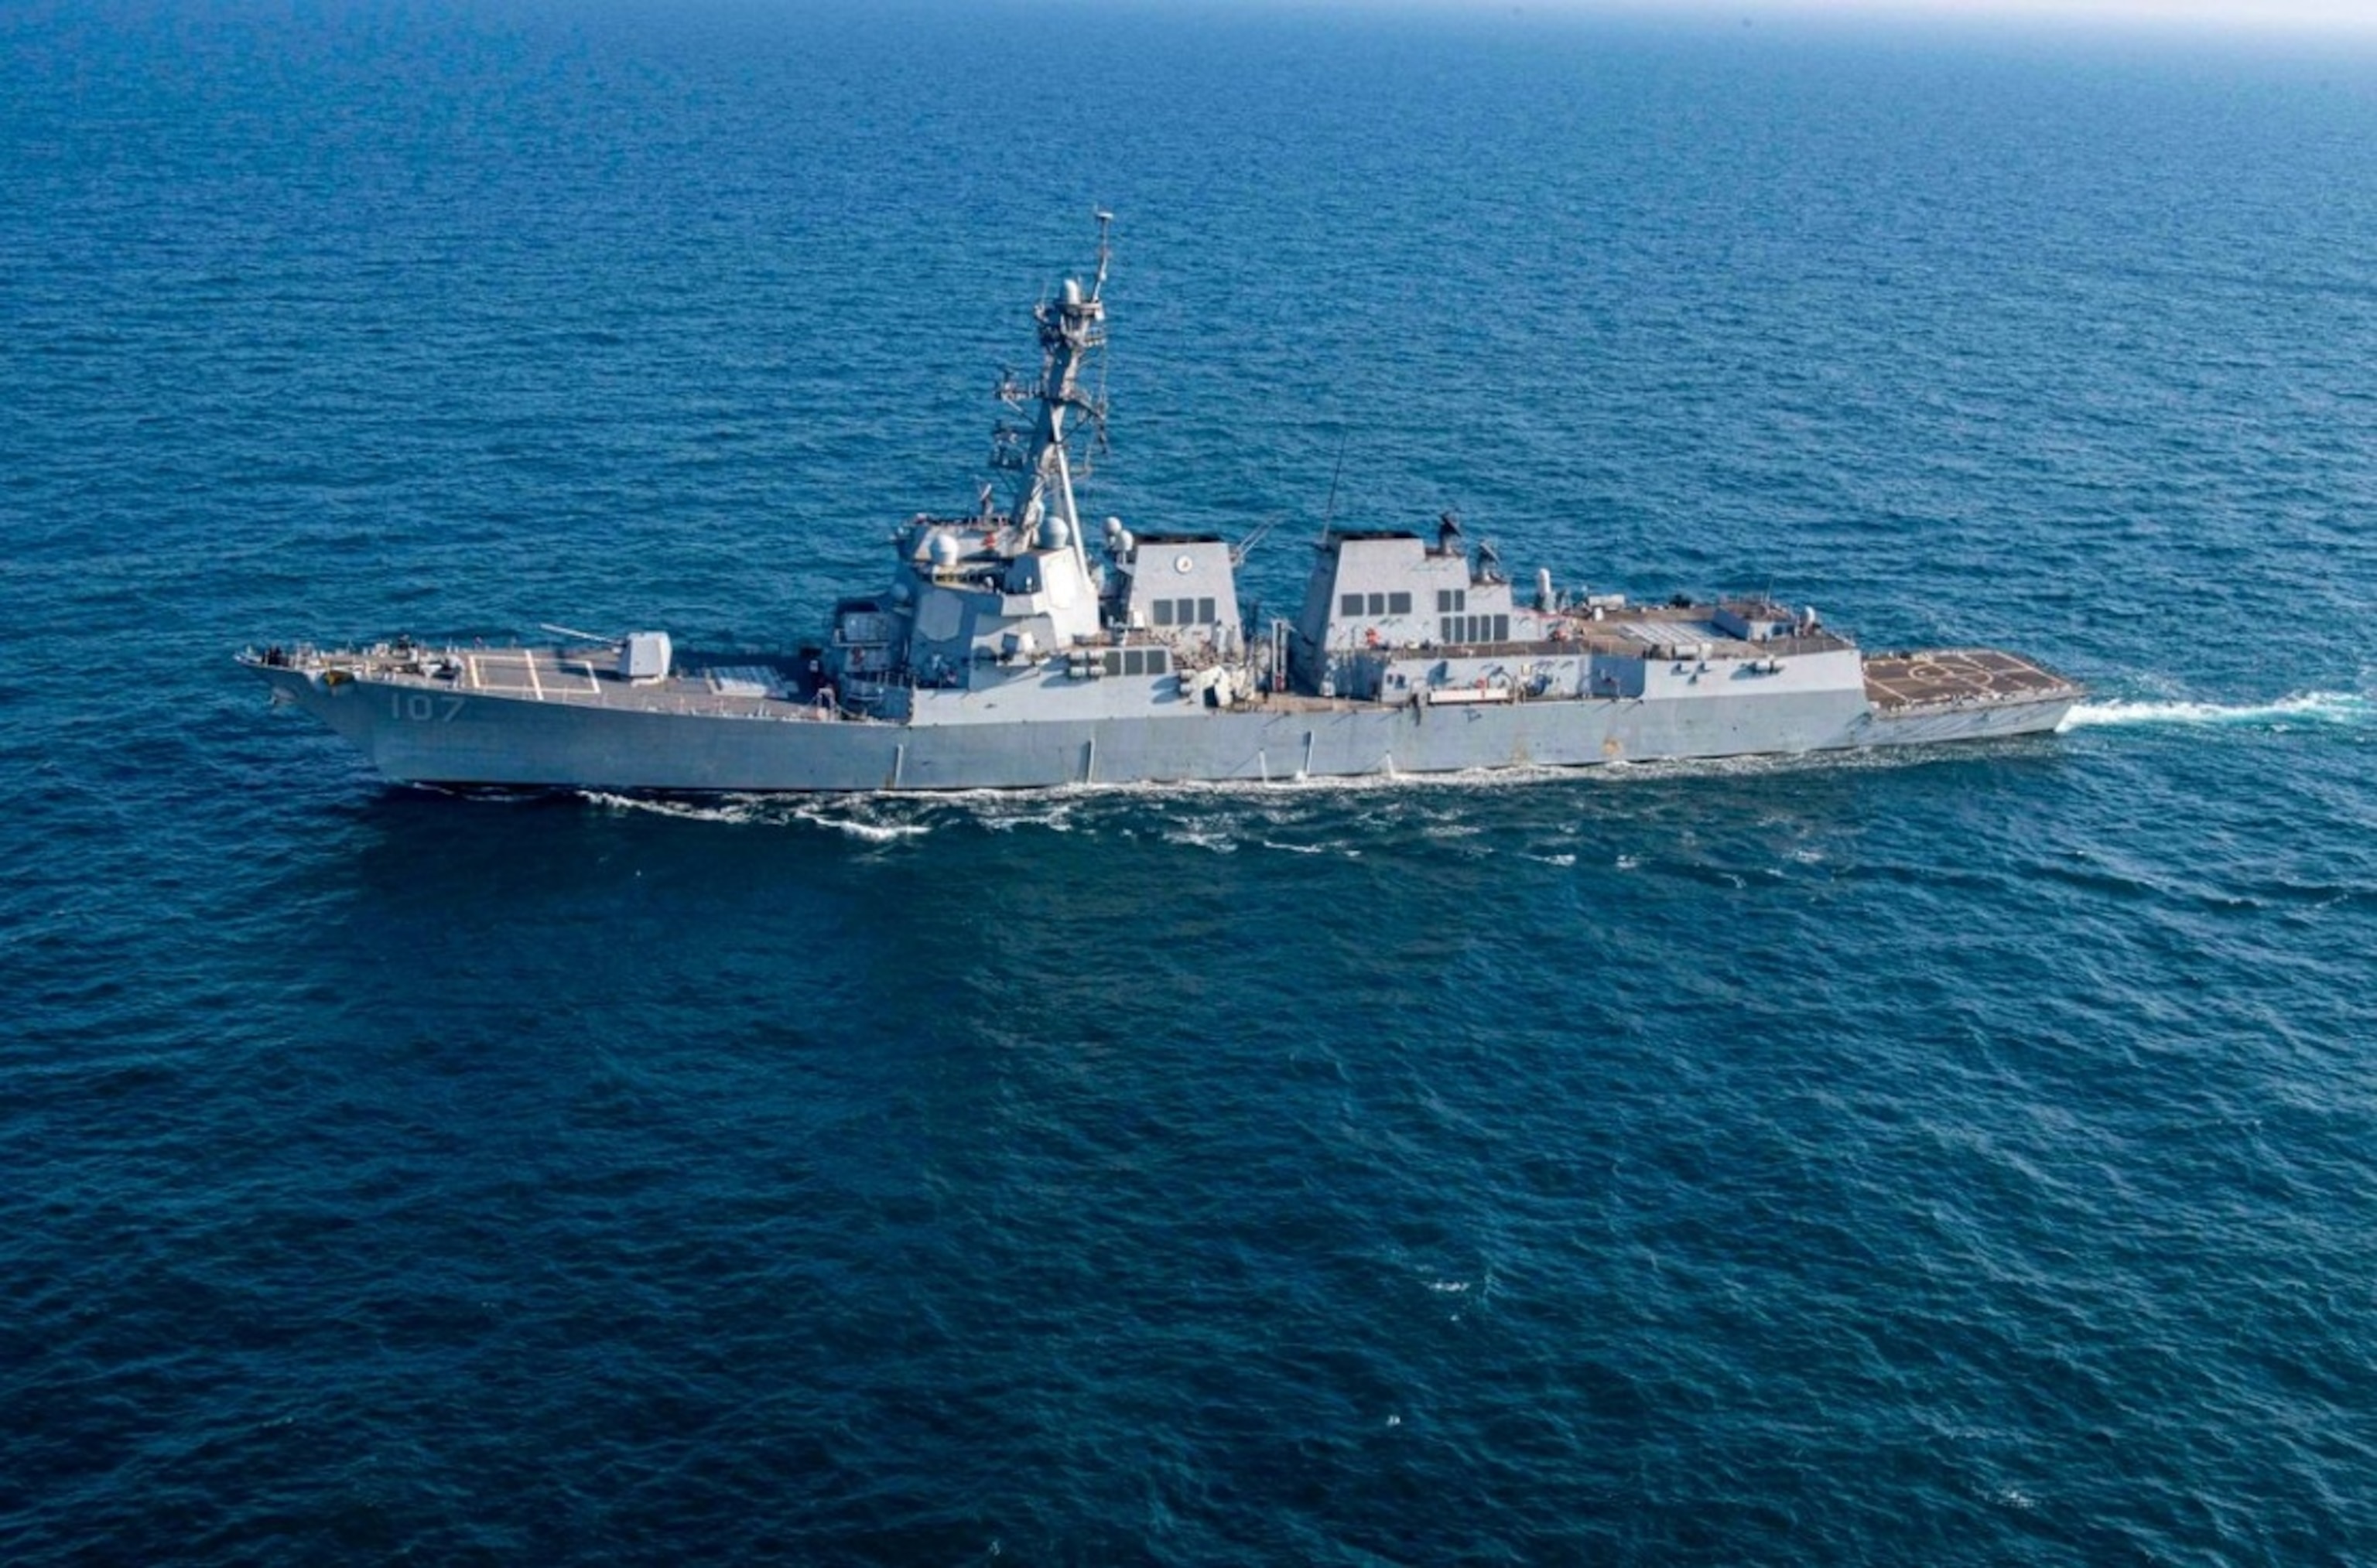 PHOTO: In this photo posted to social media by U.S. Central Command, the USS Gravely is shown.